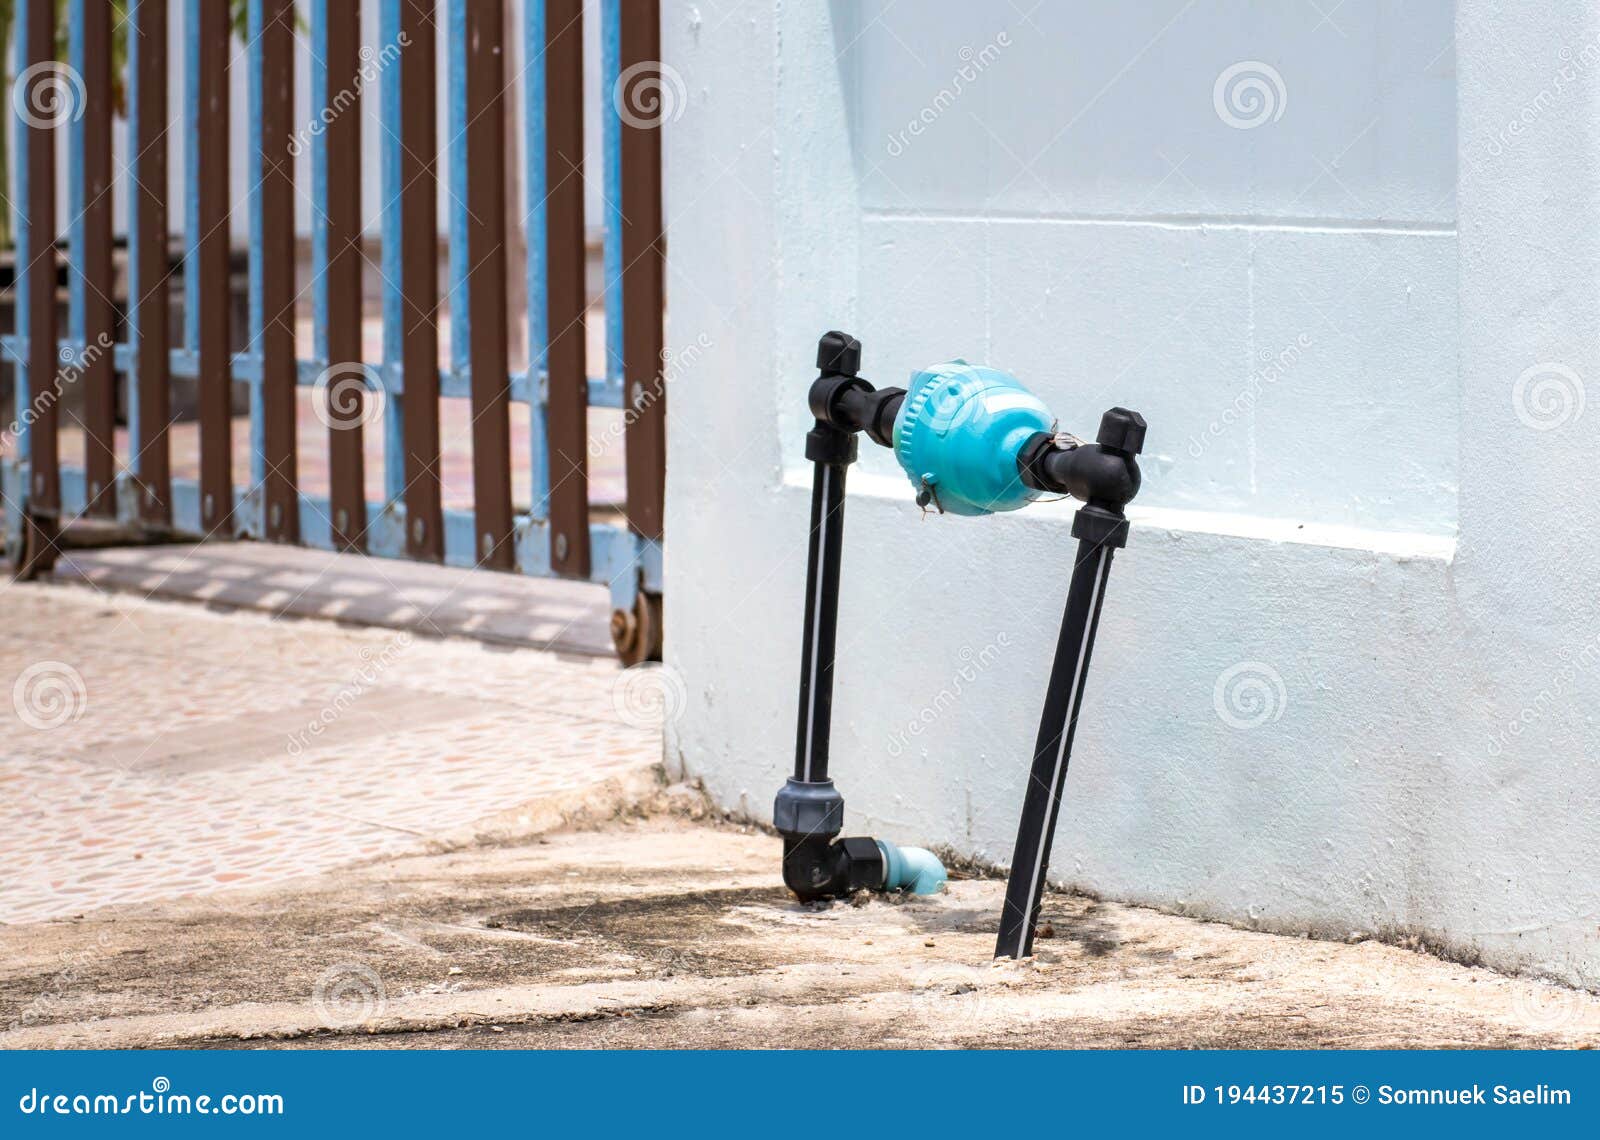 Blue Water Meter And Valve Supply Pipe With Joint And Hold On Front Water Meter On Side Of House